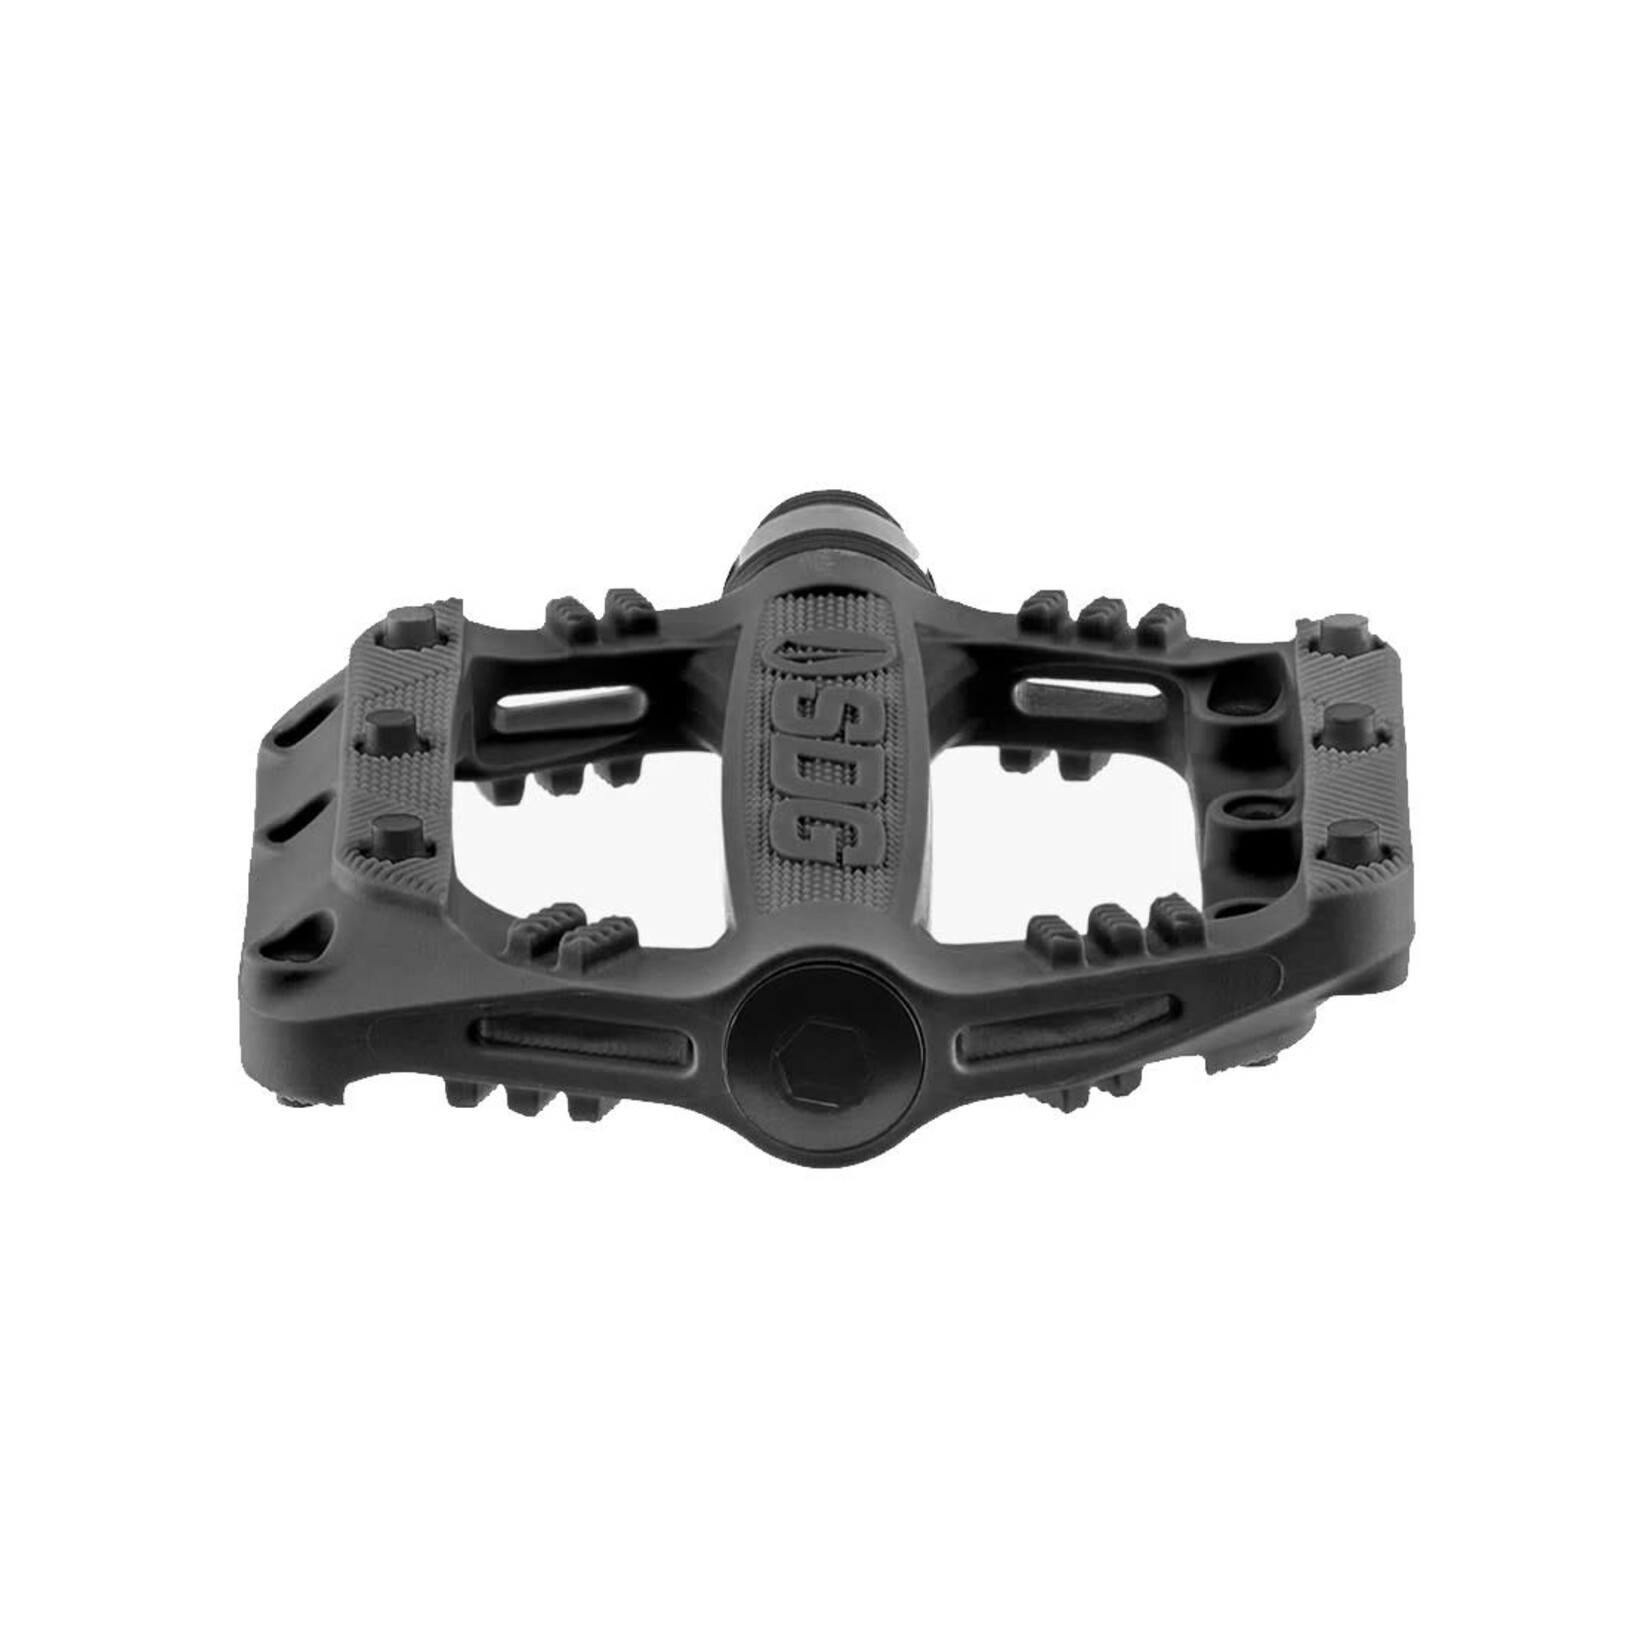 SDG Components Slater, Youth Flat Pedal 9/16" Black